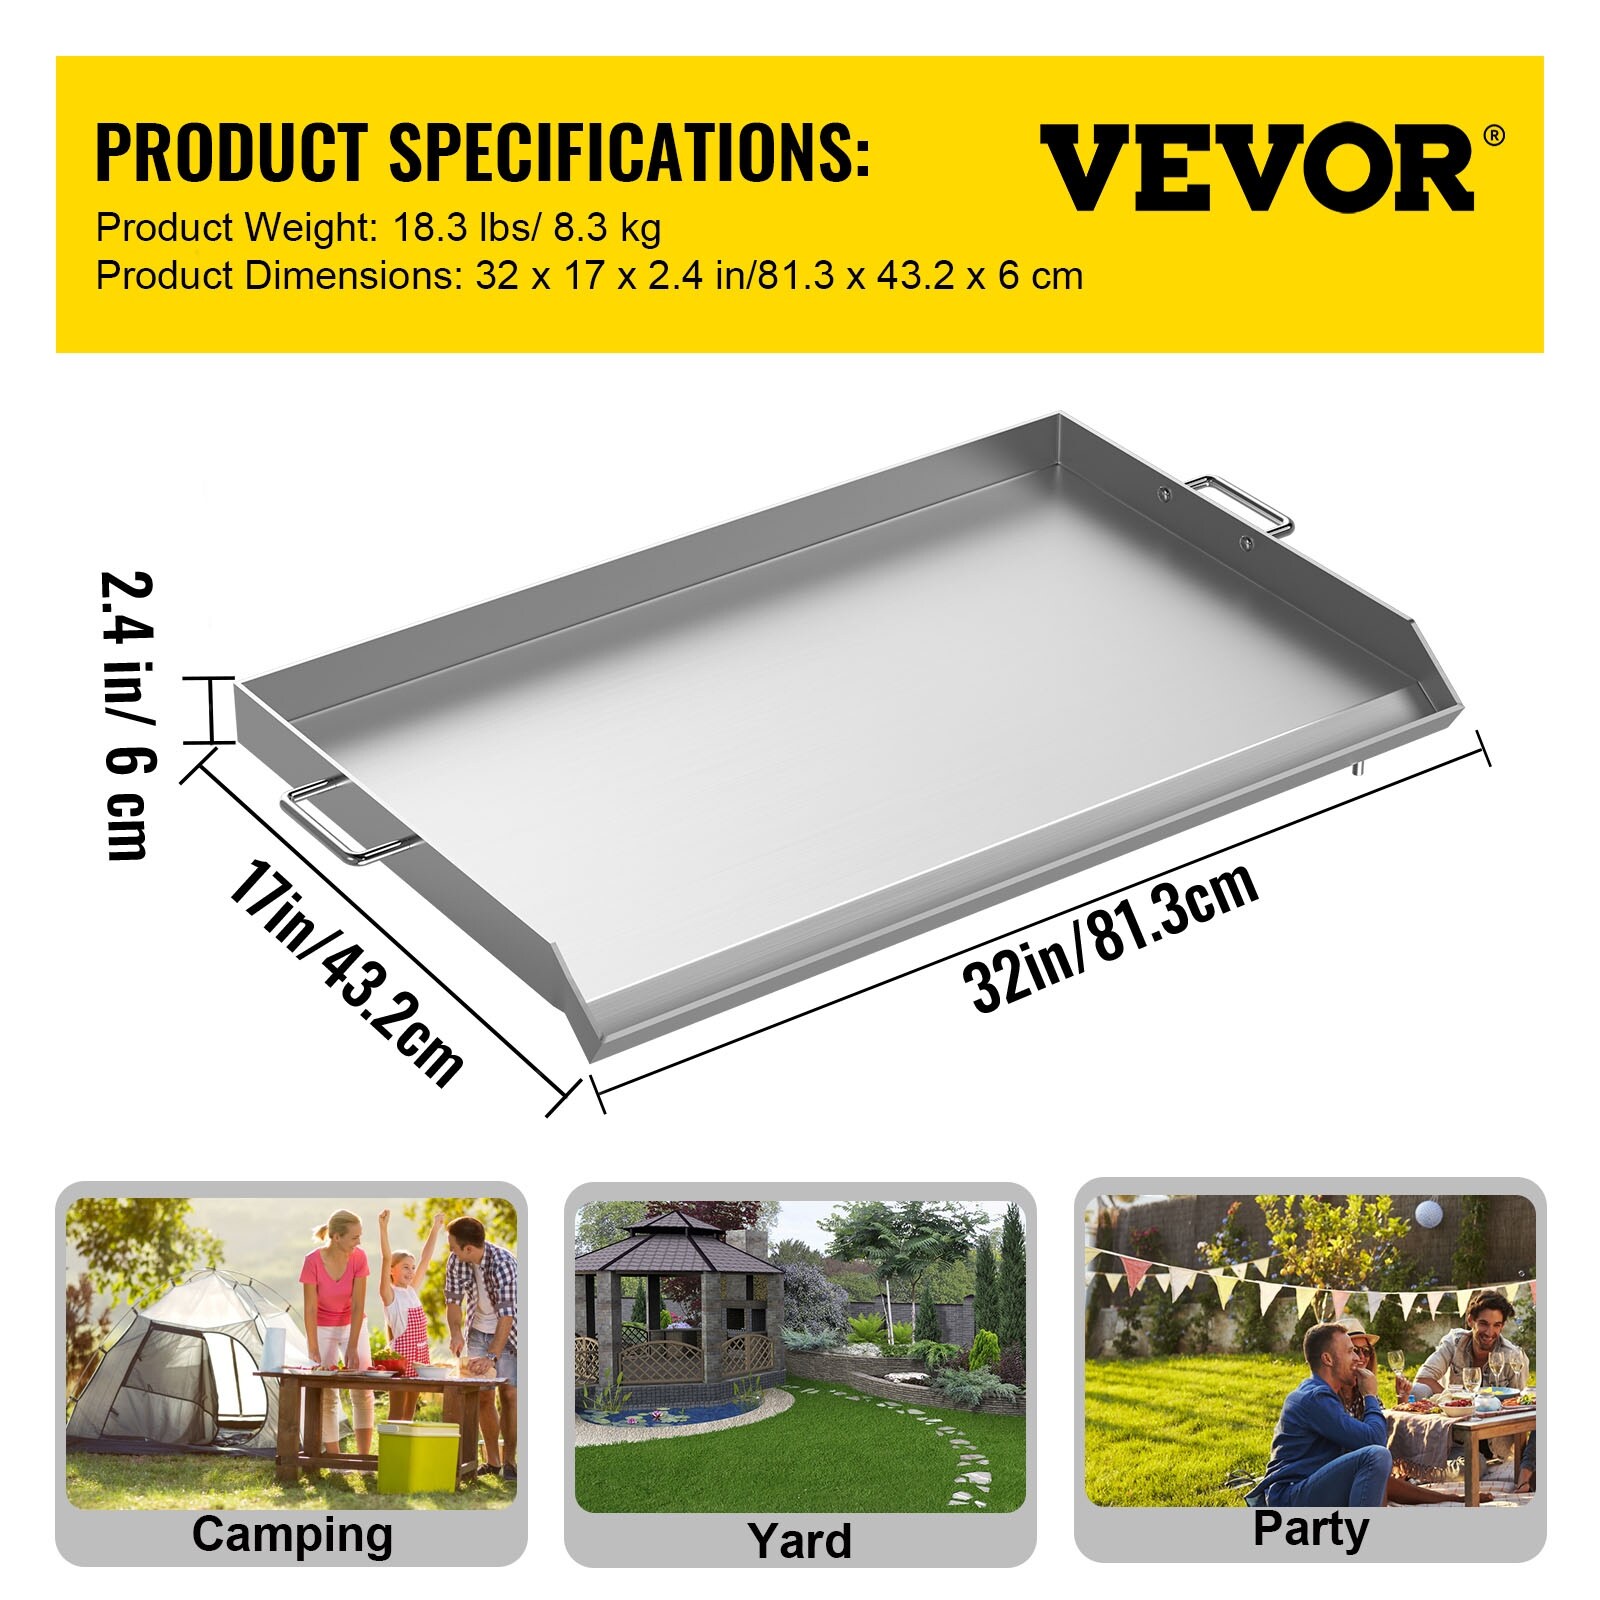 VEVOR Stainless Steel Griddle,Universal Flat Top Rectangular Plate, BBQ Charcoal/Gas Non-Stick Grill with 2 Handles and Grease Groove with Hole